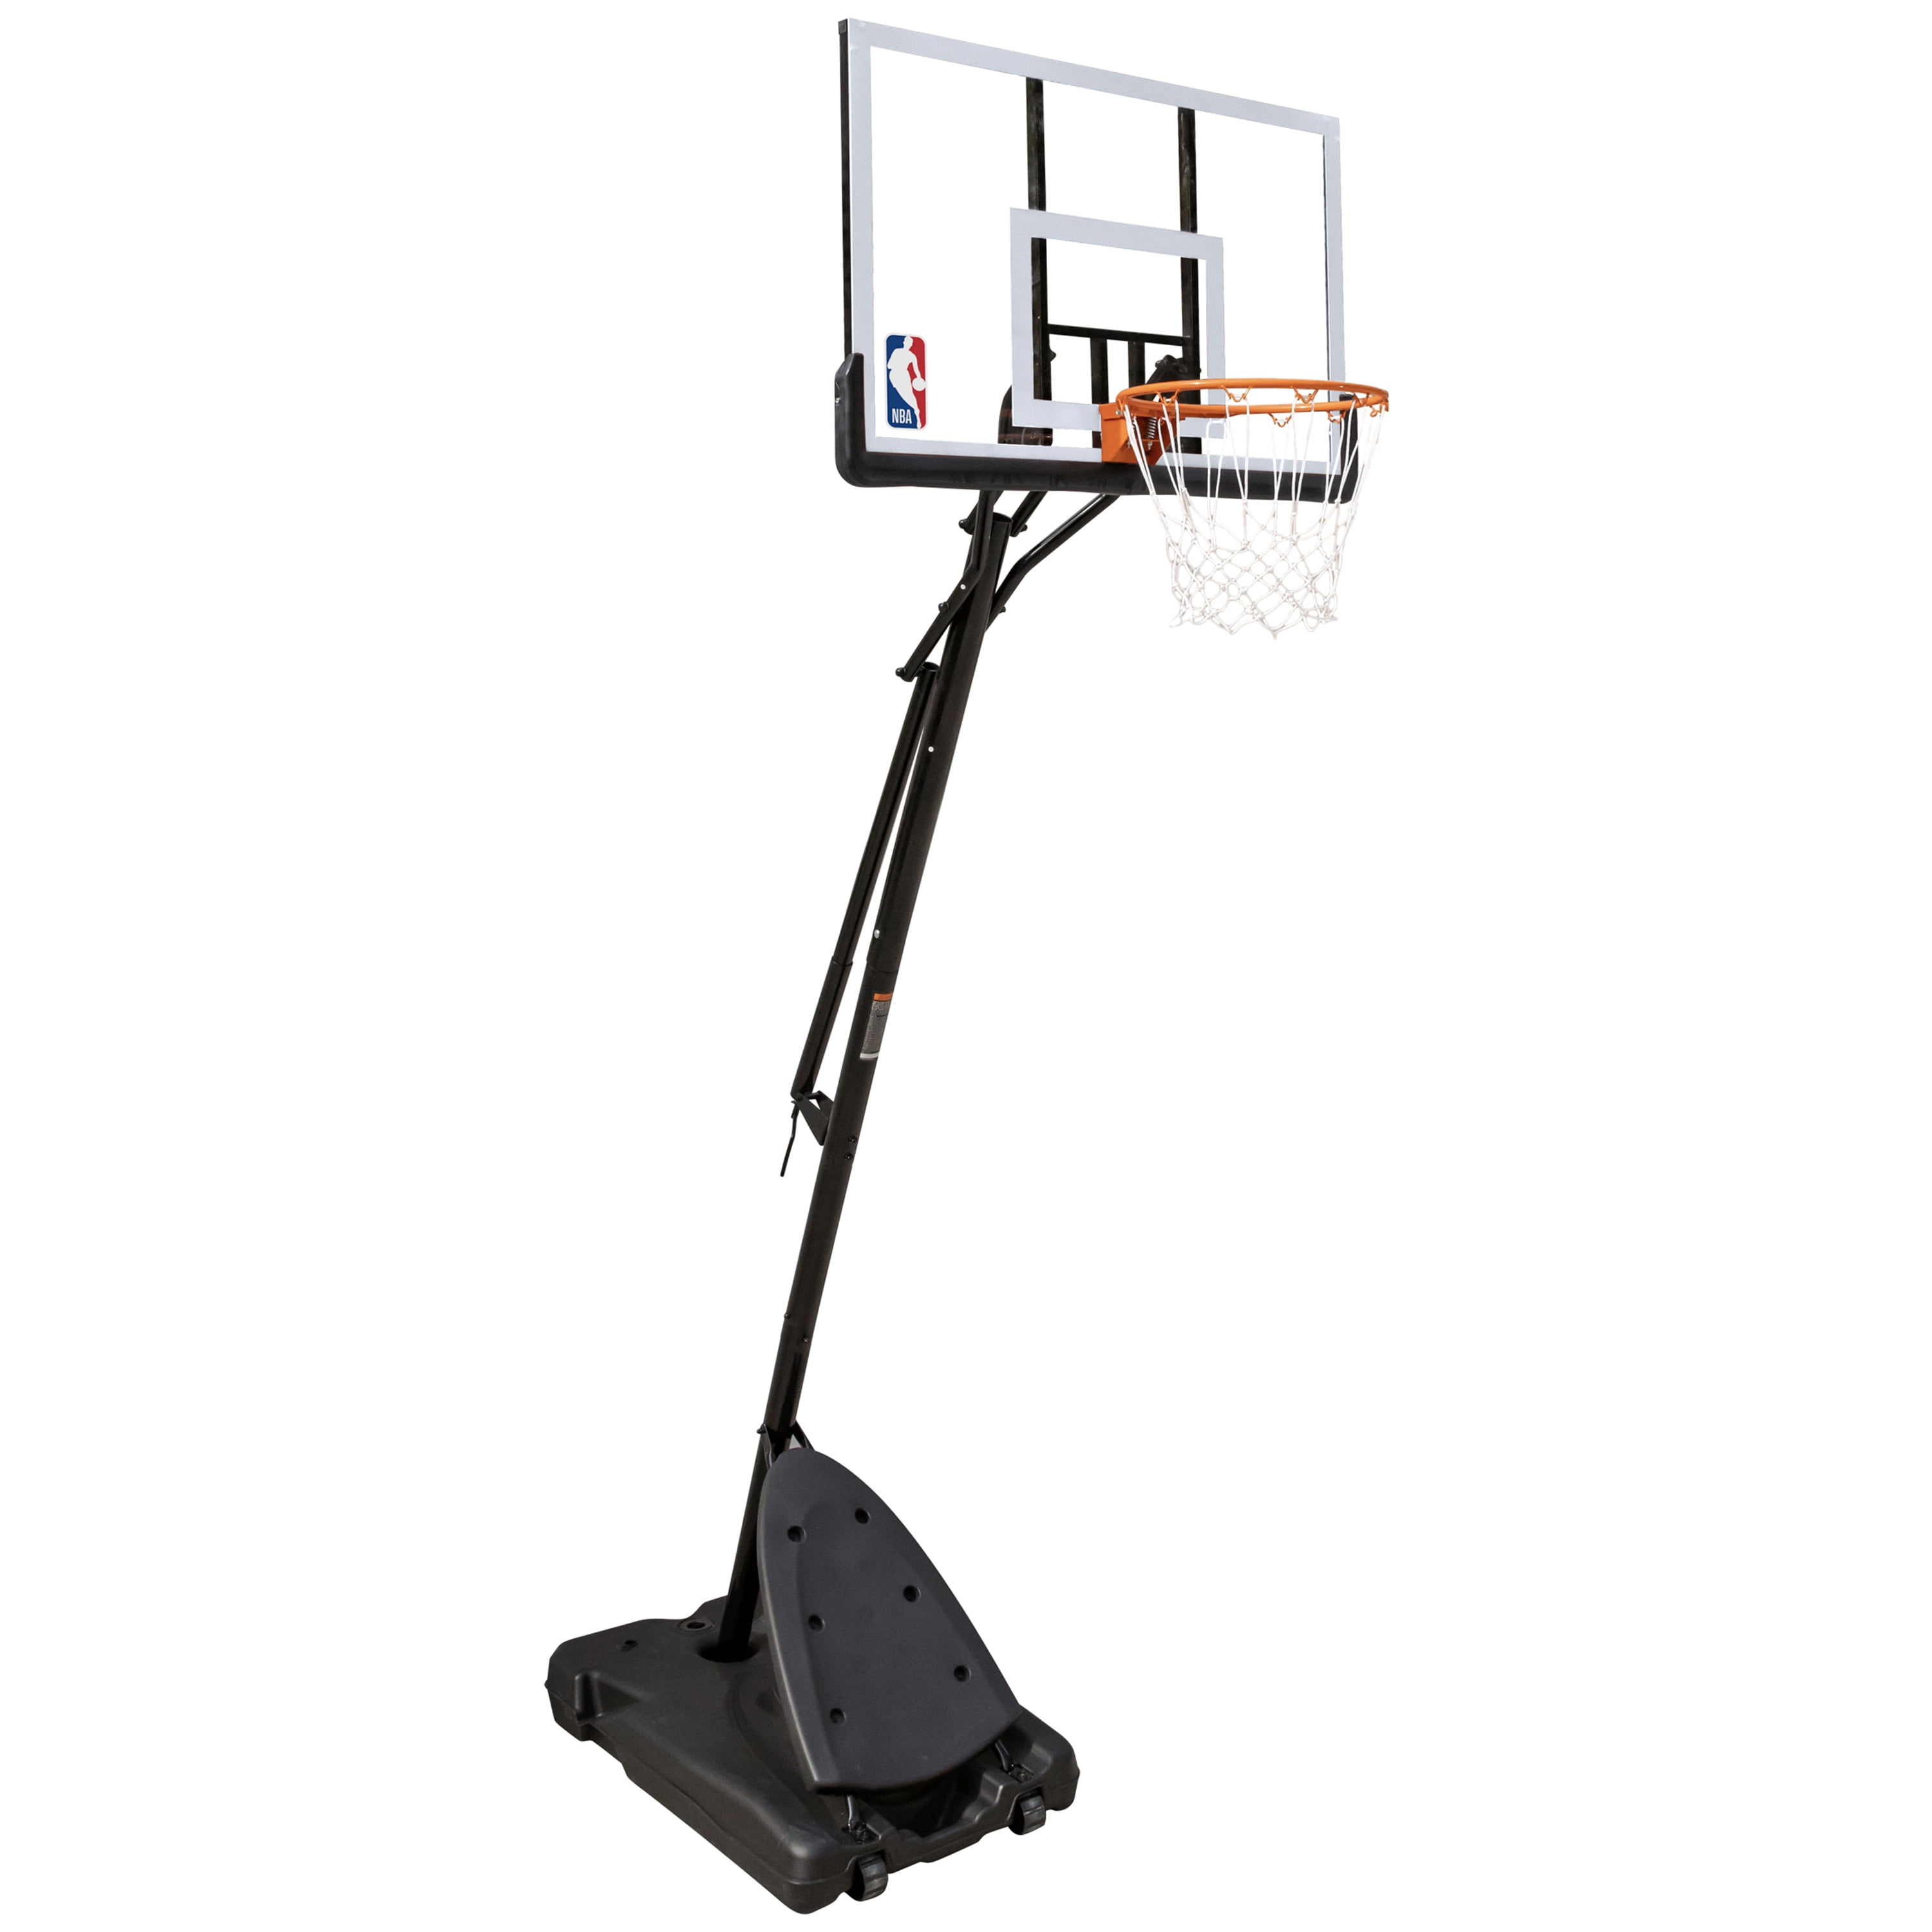 Net World Sports Optional Net Available in Single or Pairs Basketball Ring 